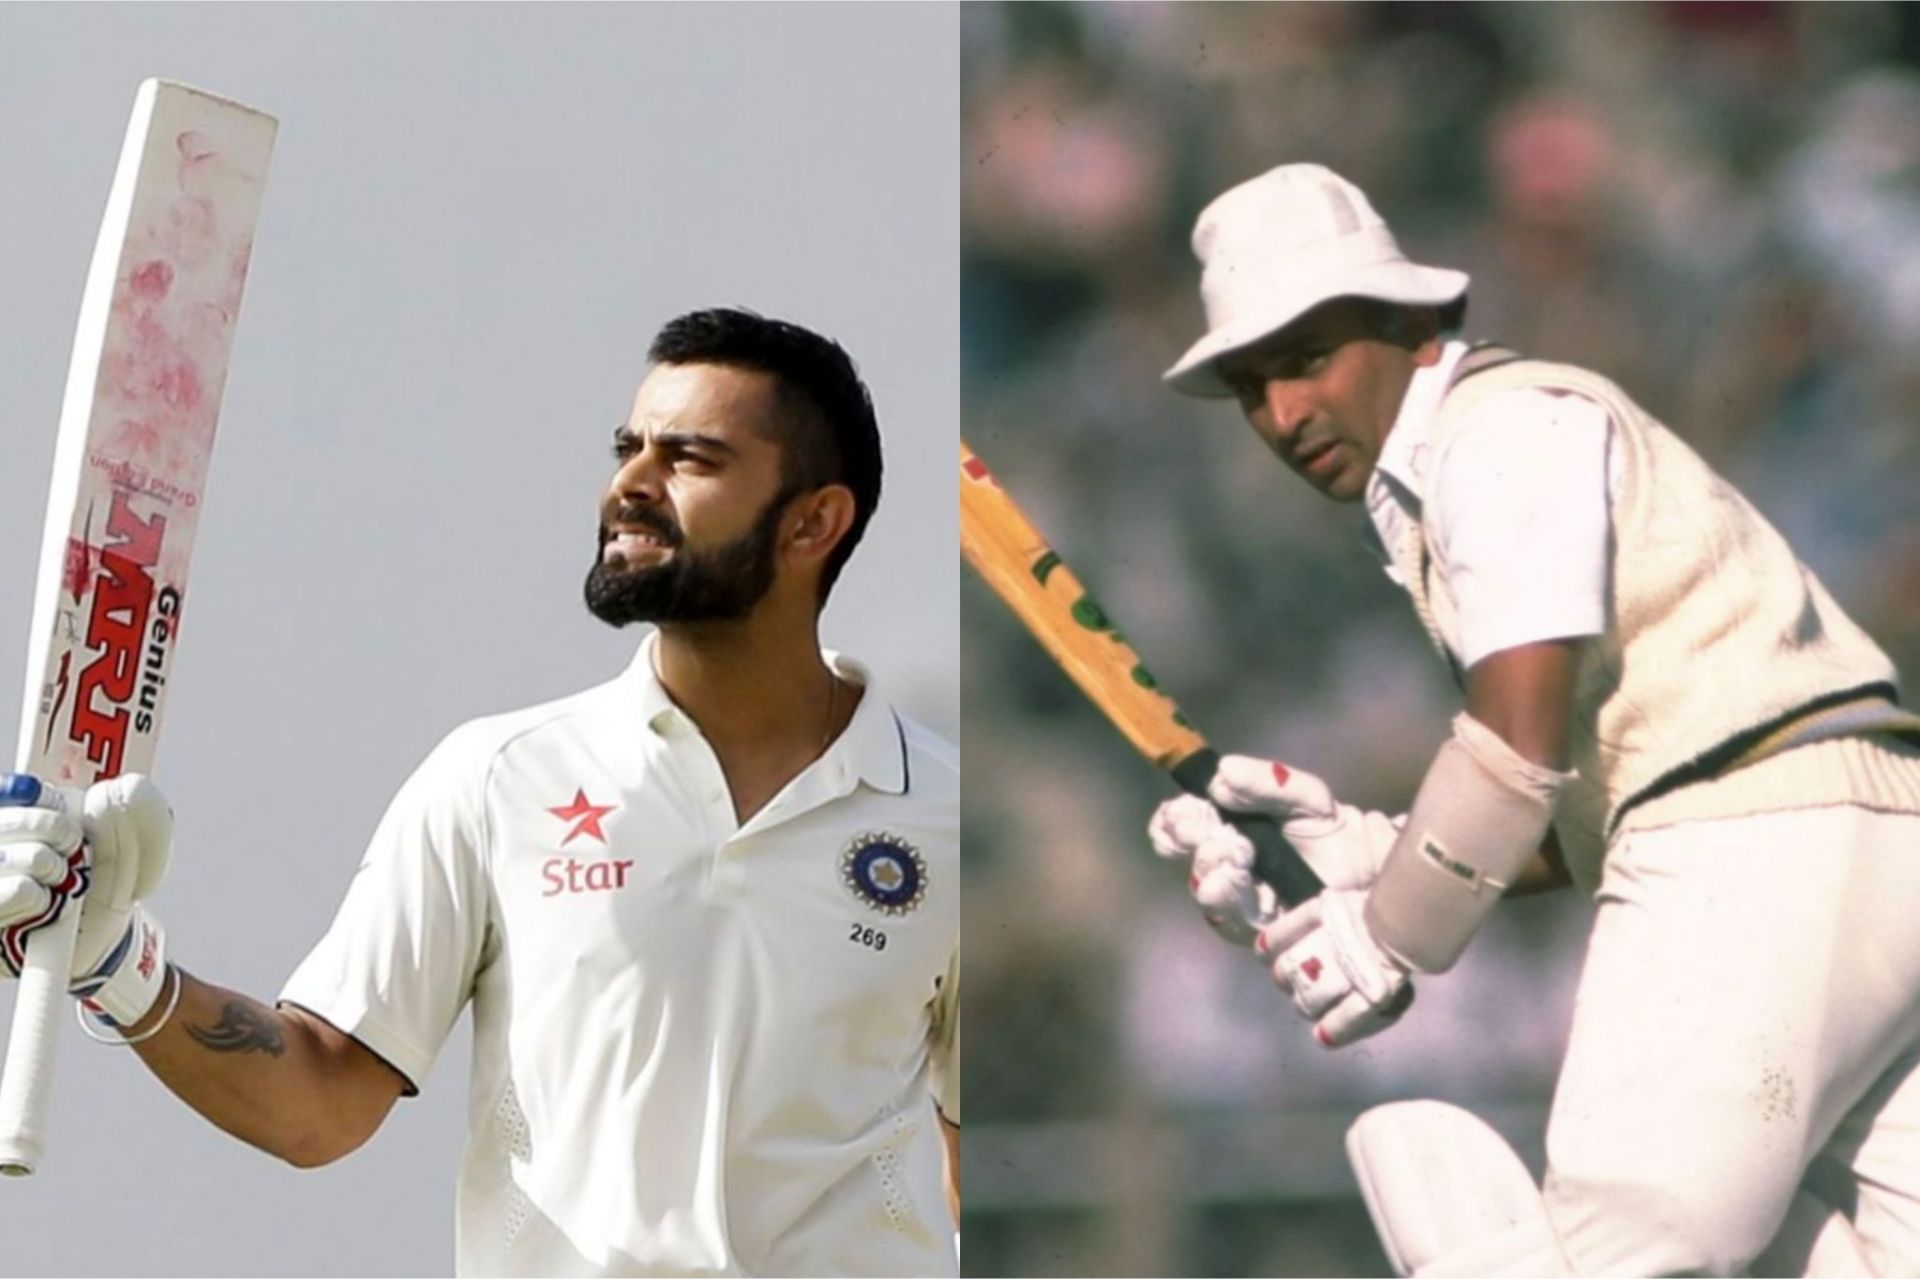 Both Virat Kohli and Sunil Gavaskar have scored double centuries against the West Indies [Getty Images]